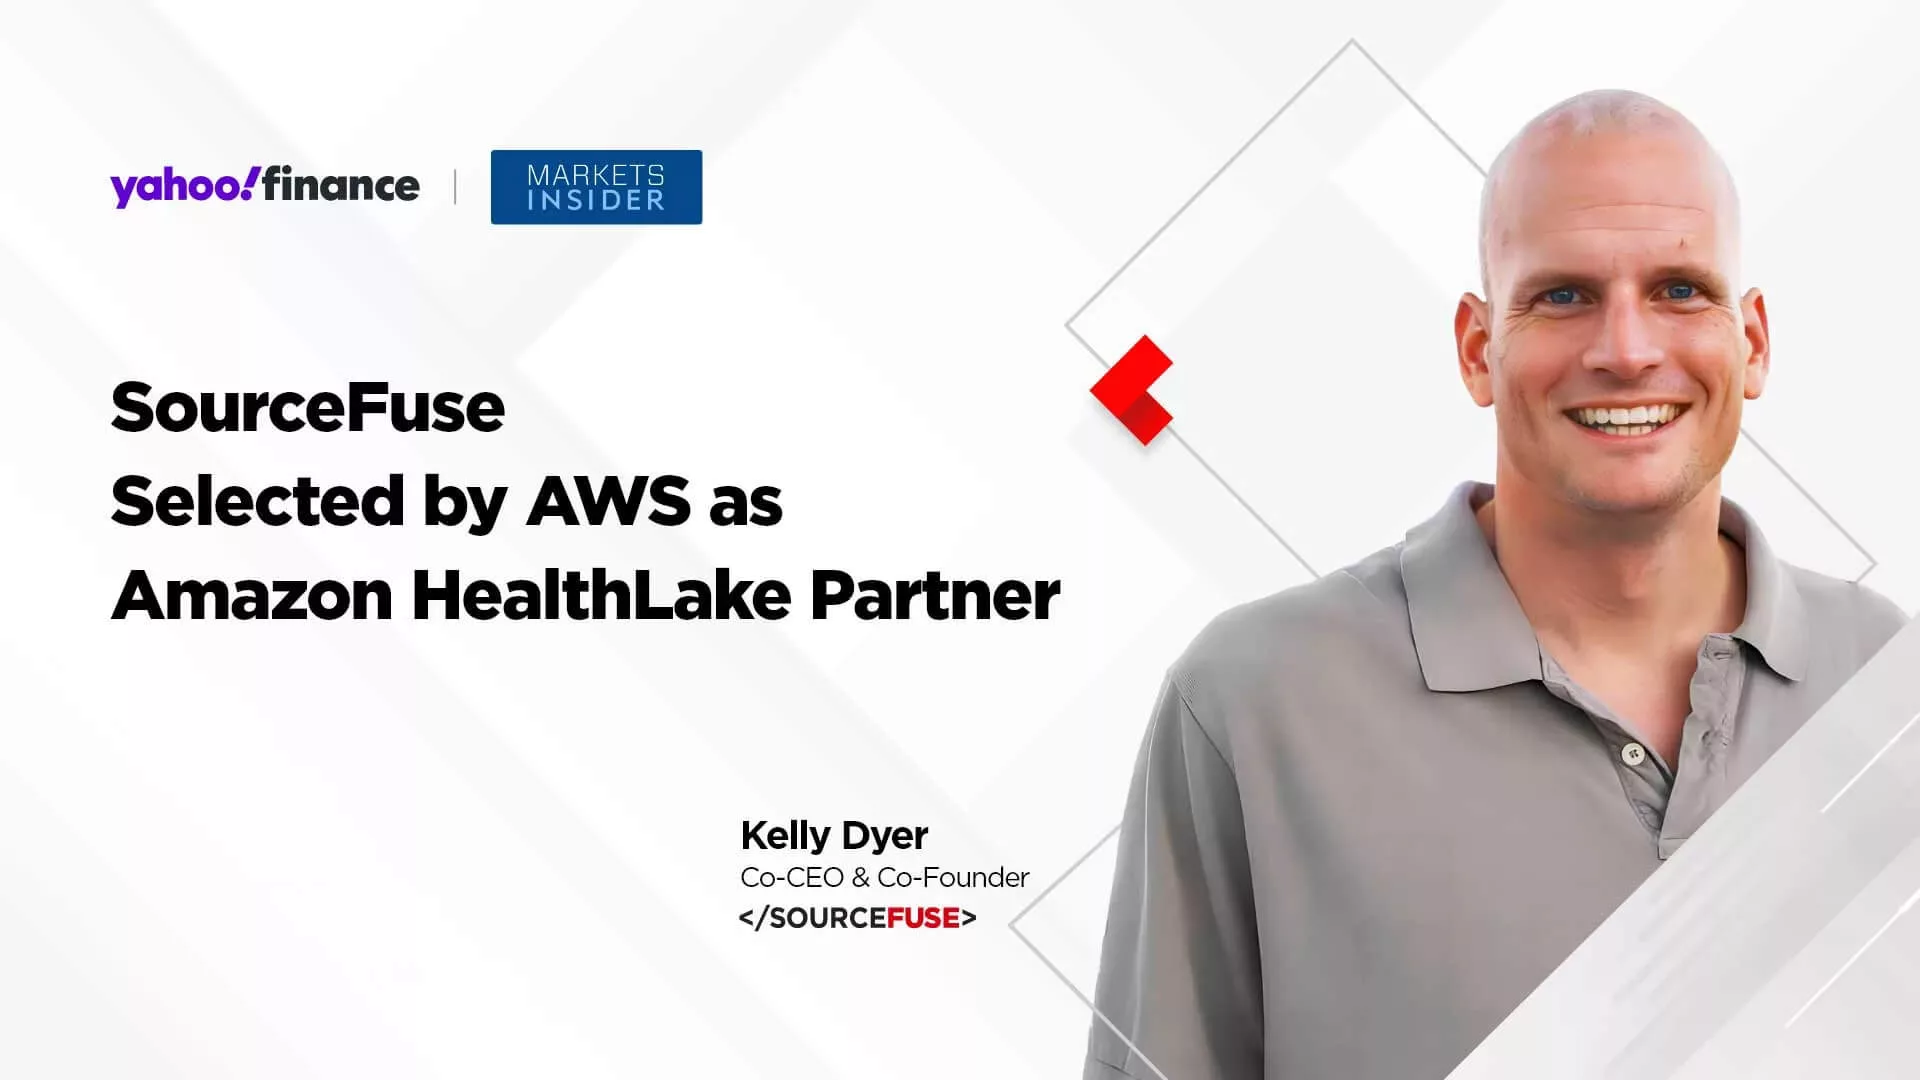 SourceFuse Selected by AWS as an Amazon HealthLake Partner